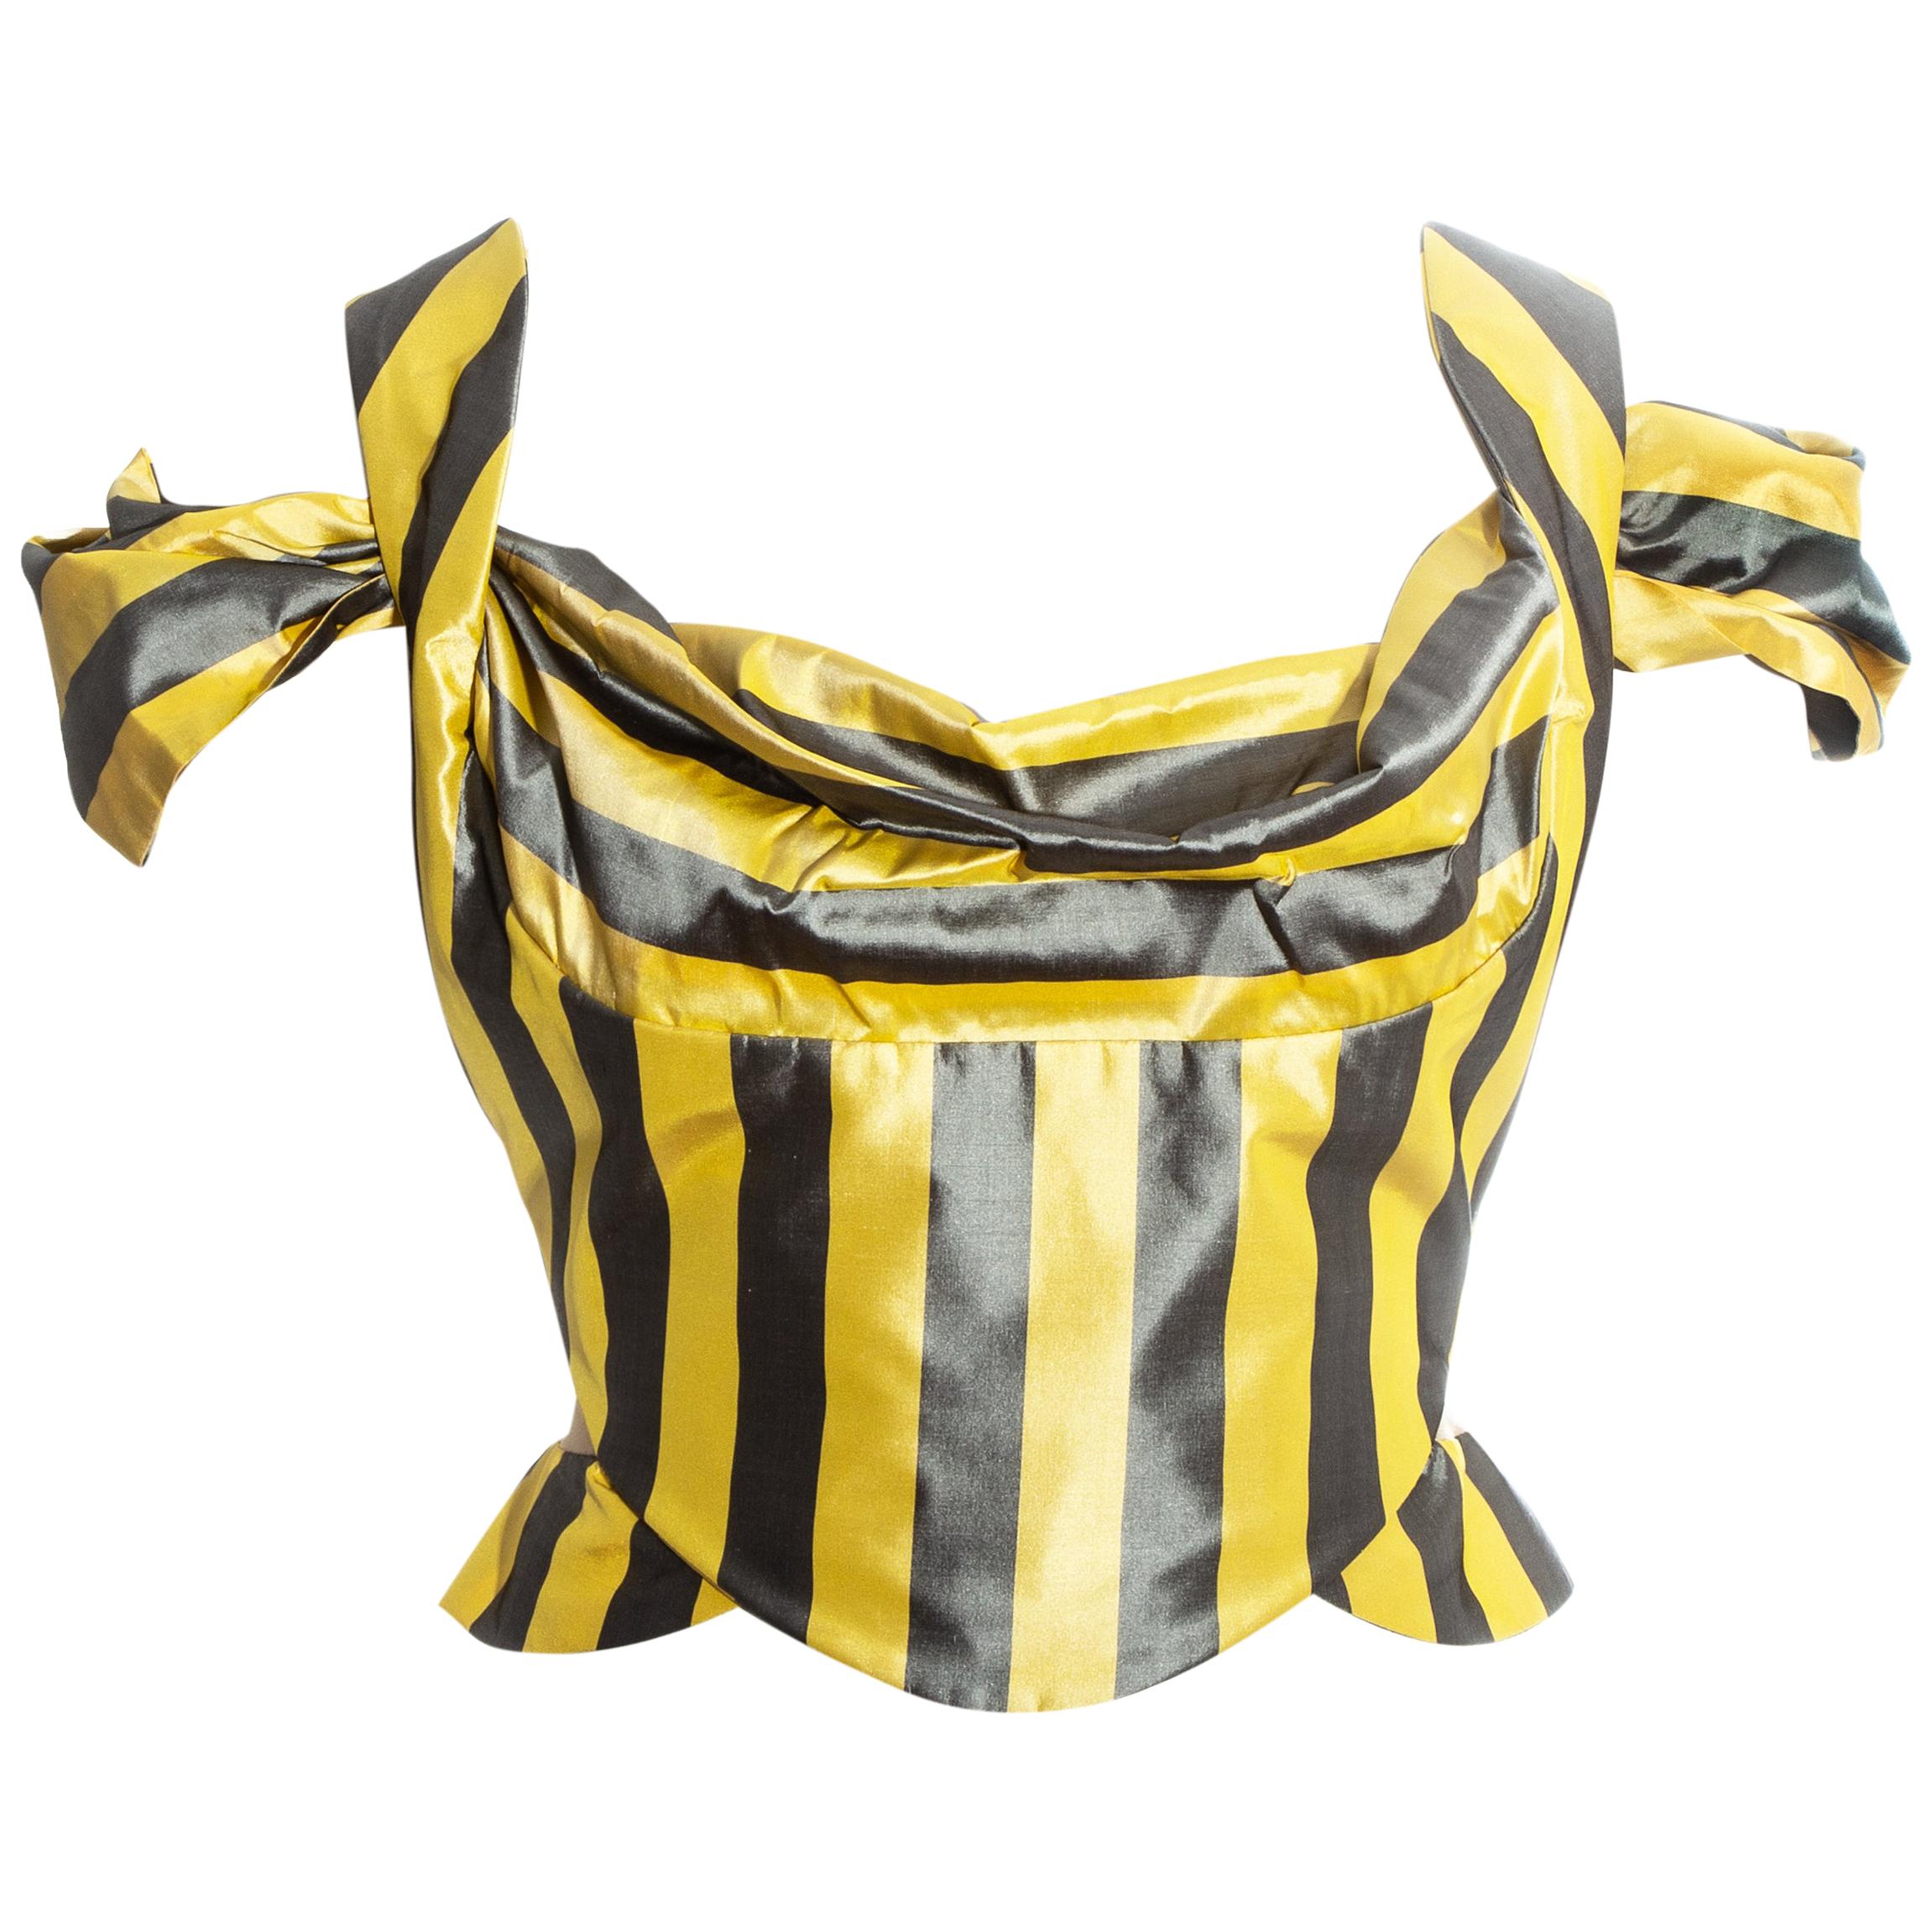 Vivienne Westwood yellow and grey striped silk corset, ss 1998